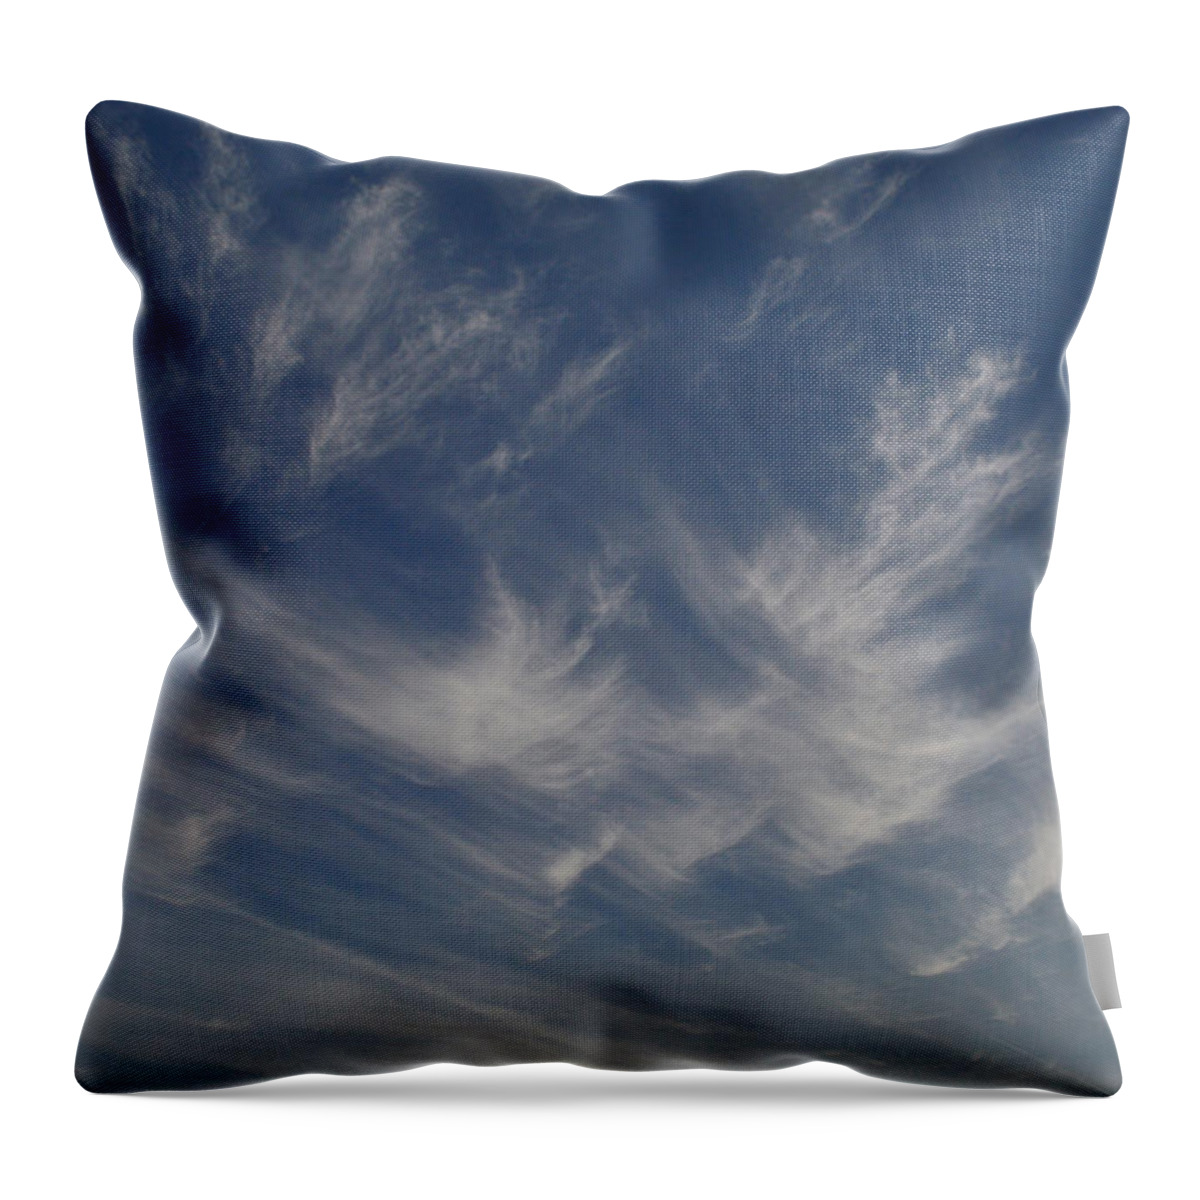 Abstract Throw Pillow featuring the photograph Cirrus Cloud Strokes 2 by Lyle Crump